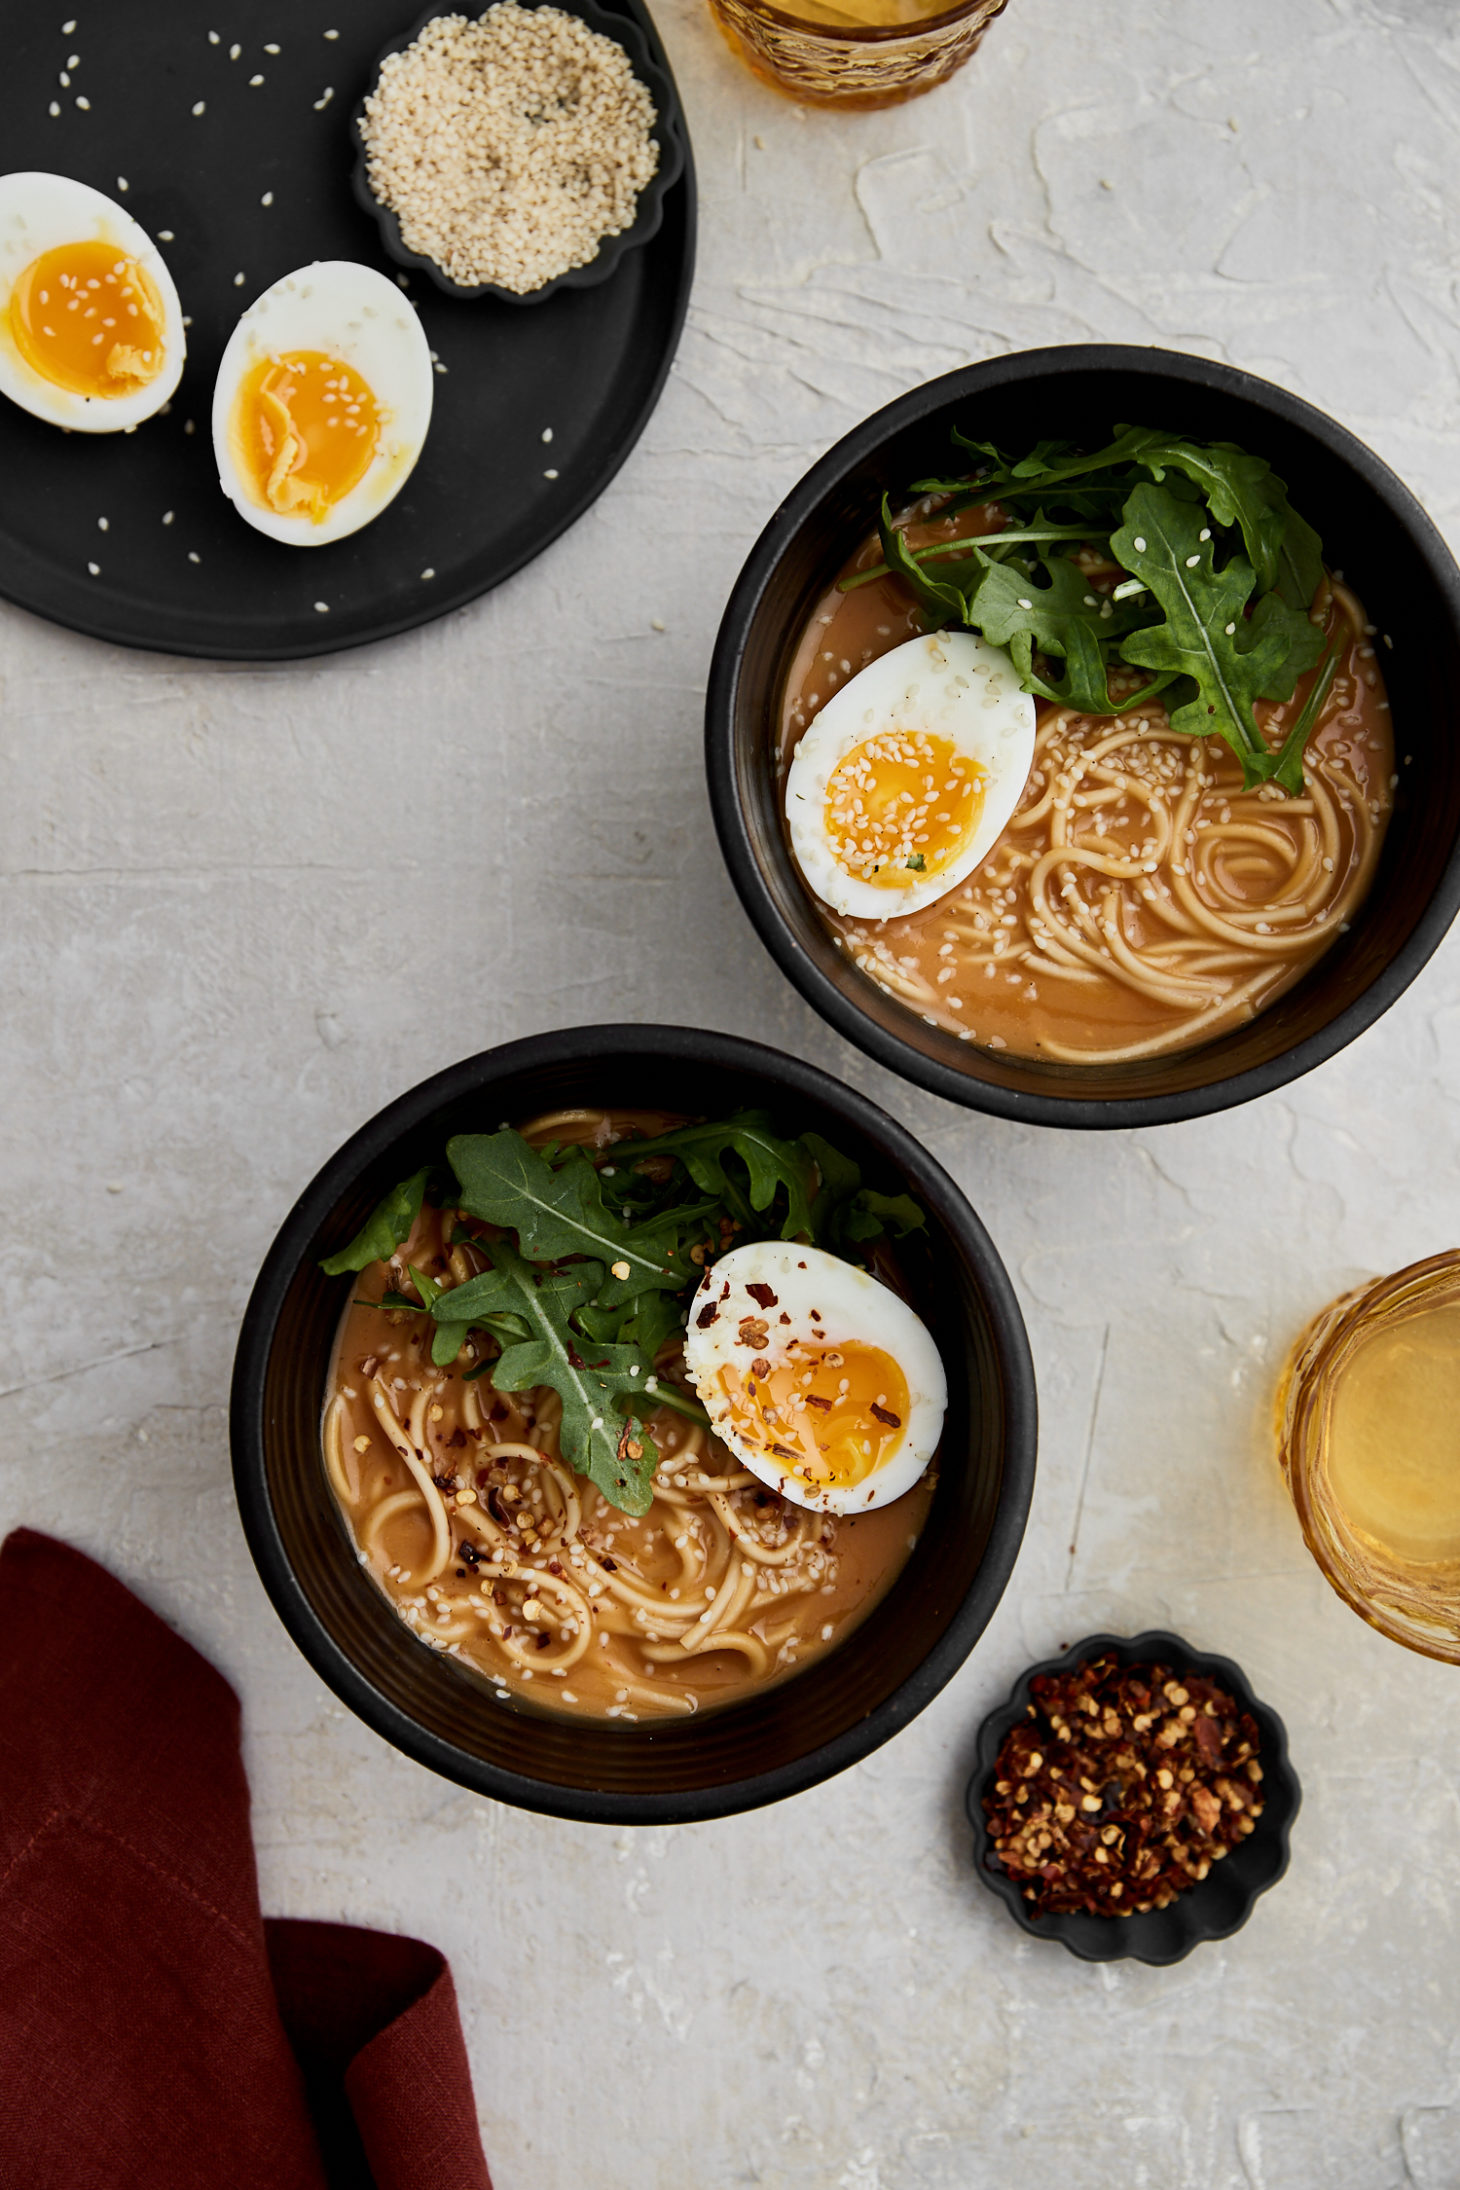 two black bowls of noodles in broth topped with arugula and cut-open soft-boiled eggs.